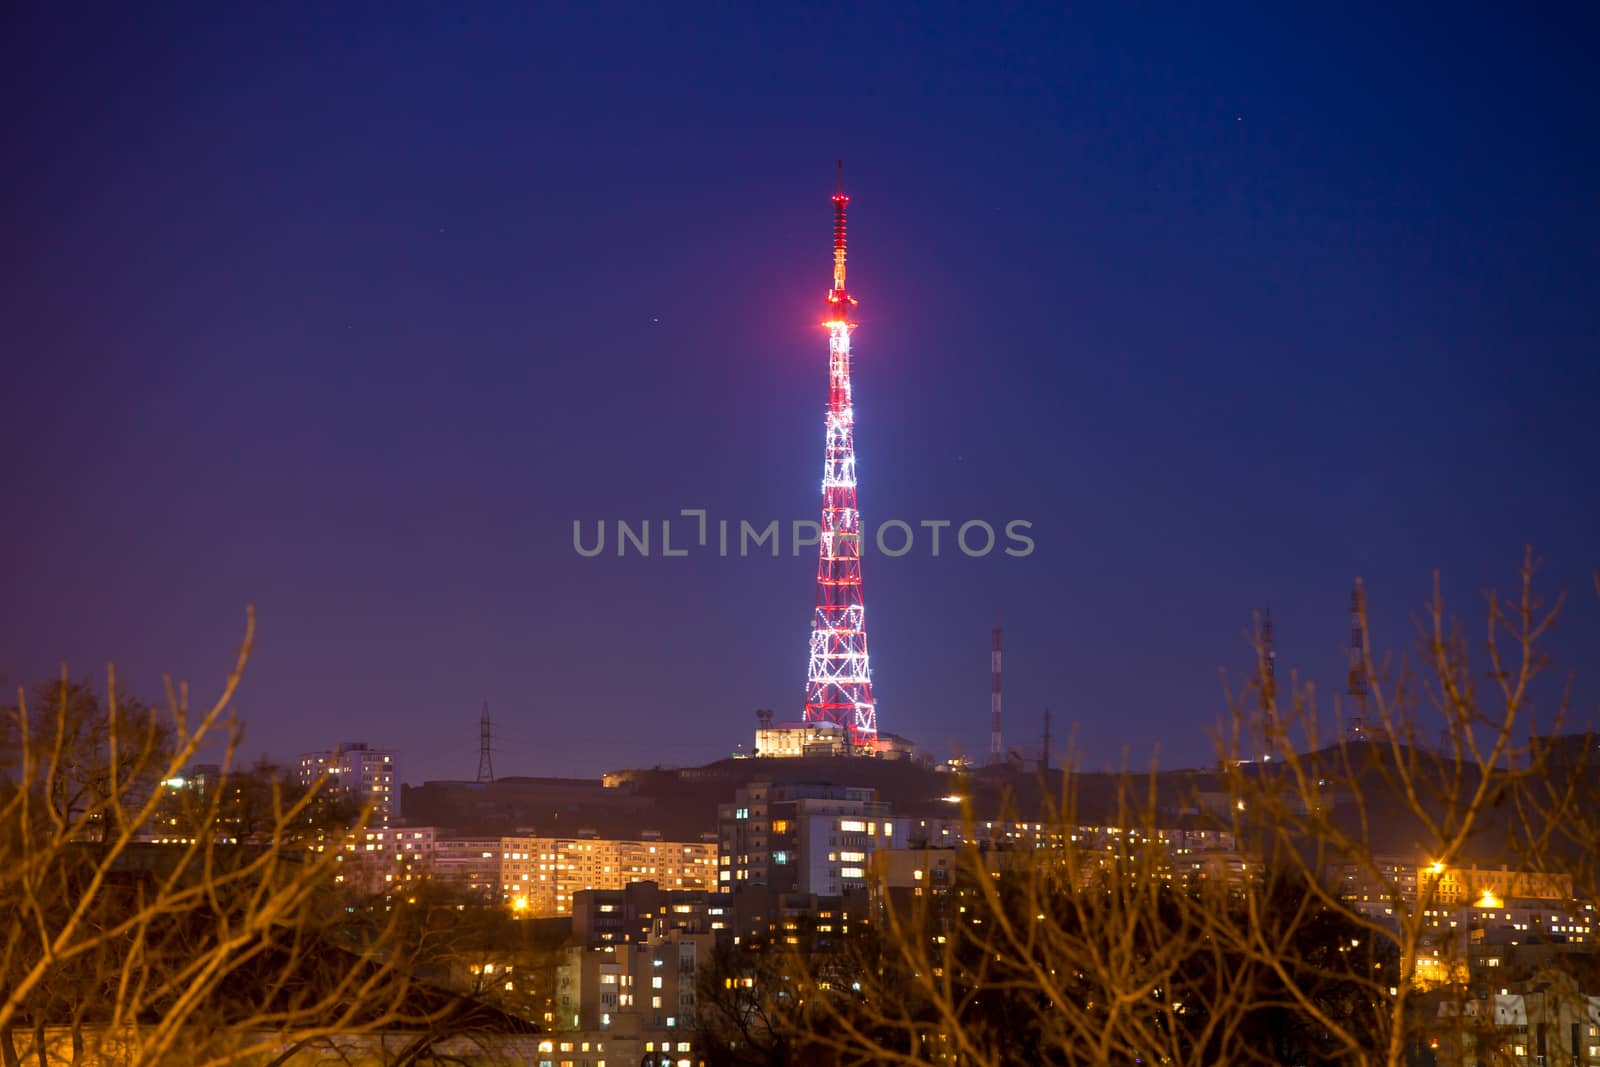 Night illumination of a television tower in Vladivostok by PrimDiscovery